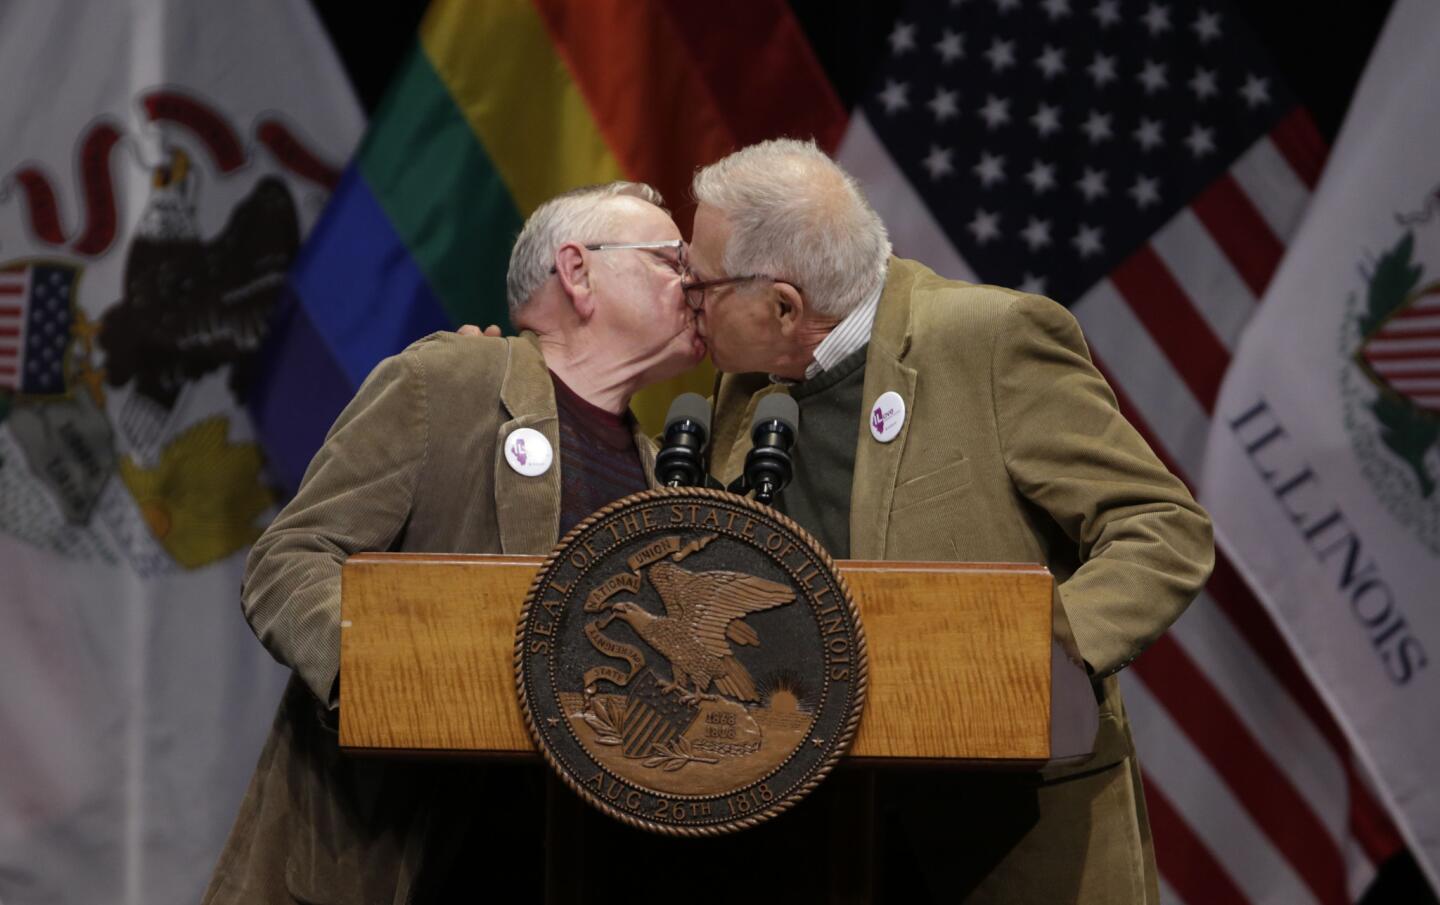 Gay marriage in Illinois